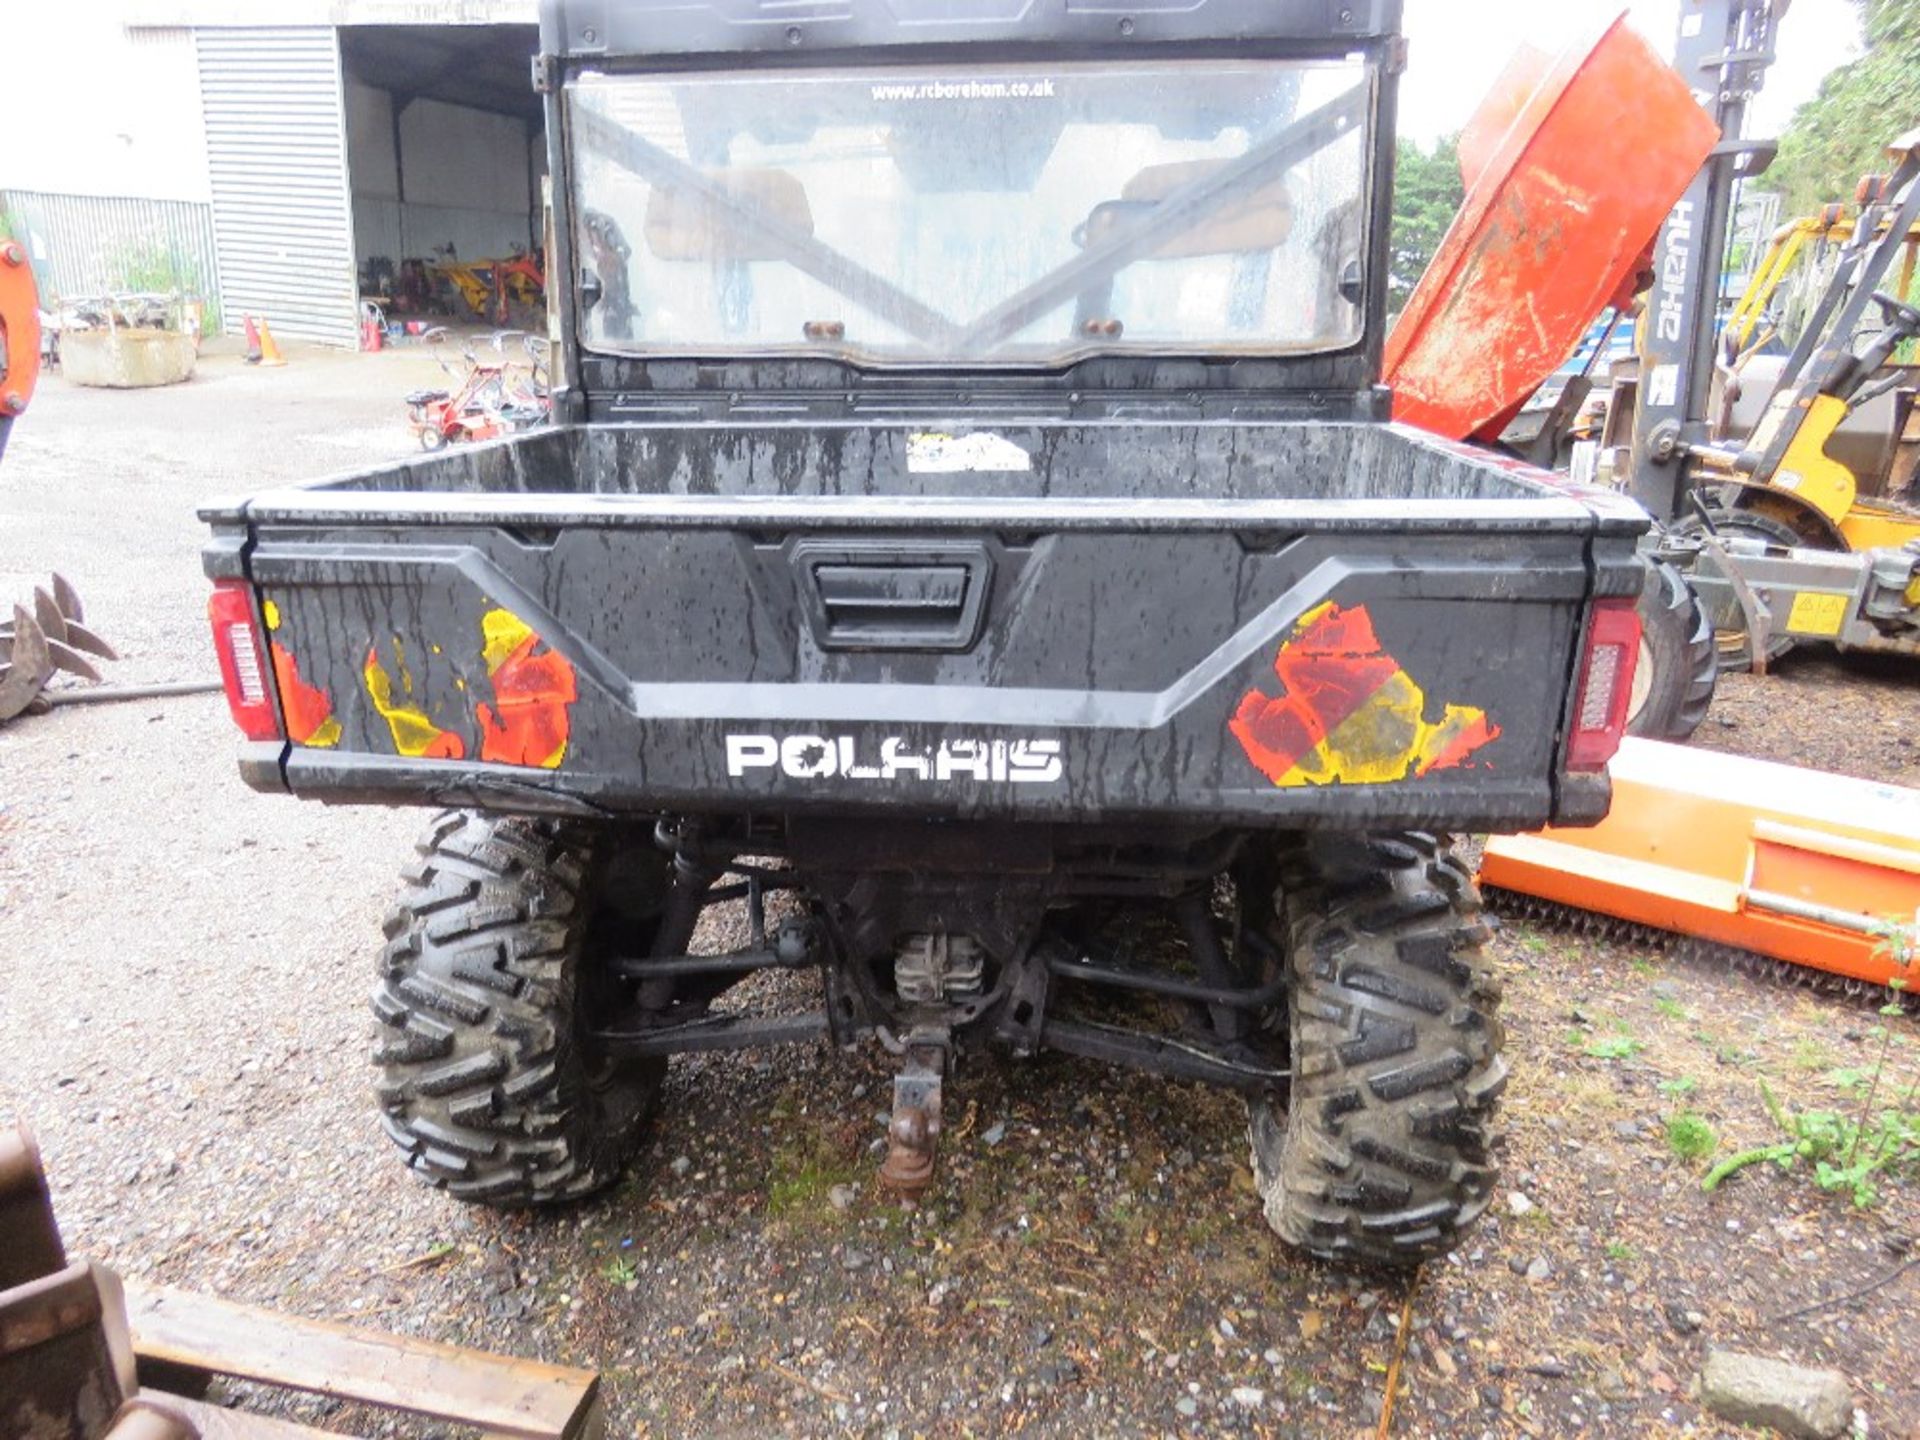 POLARIS RANGER DIESEL RTV BUGGY REG:EU68 EOY. FRONT AND REAR SCREENS AND ROOF. 2018 WITH V5. WHEN TE - Image 9 of 12